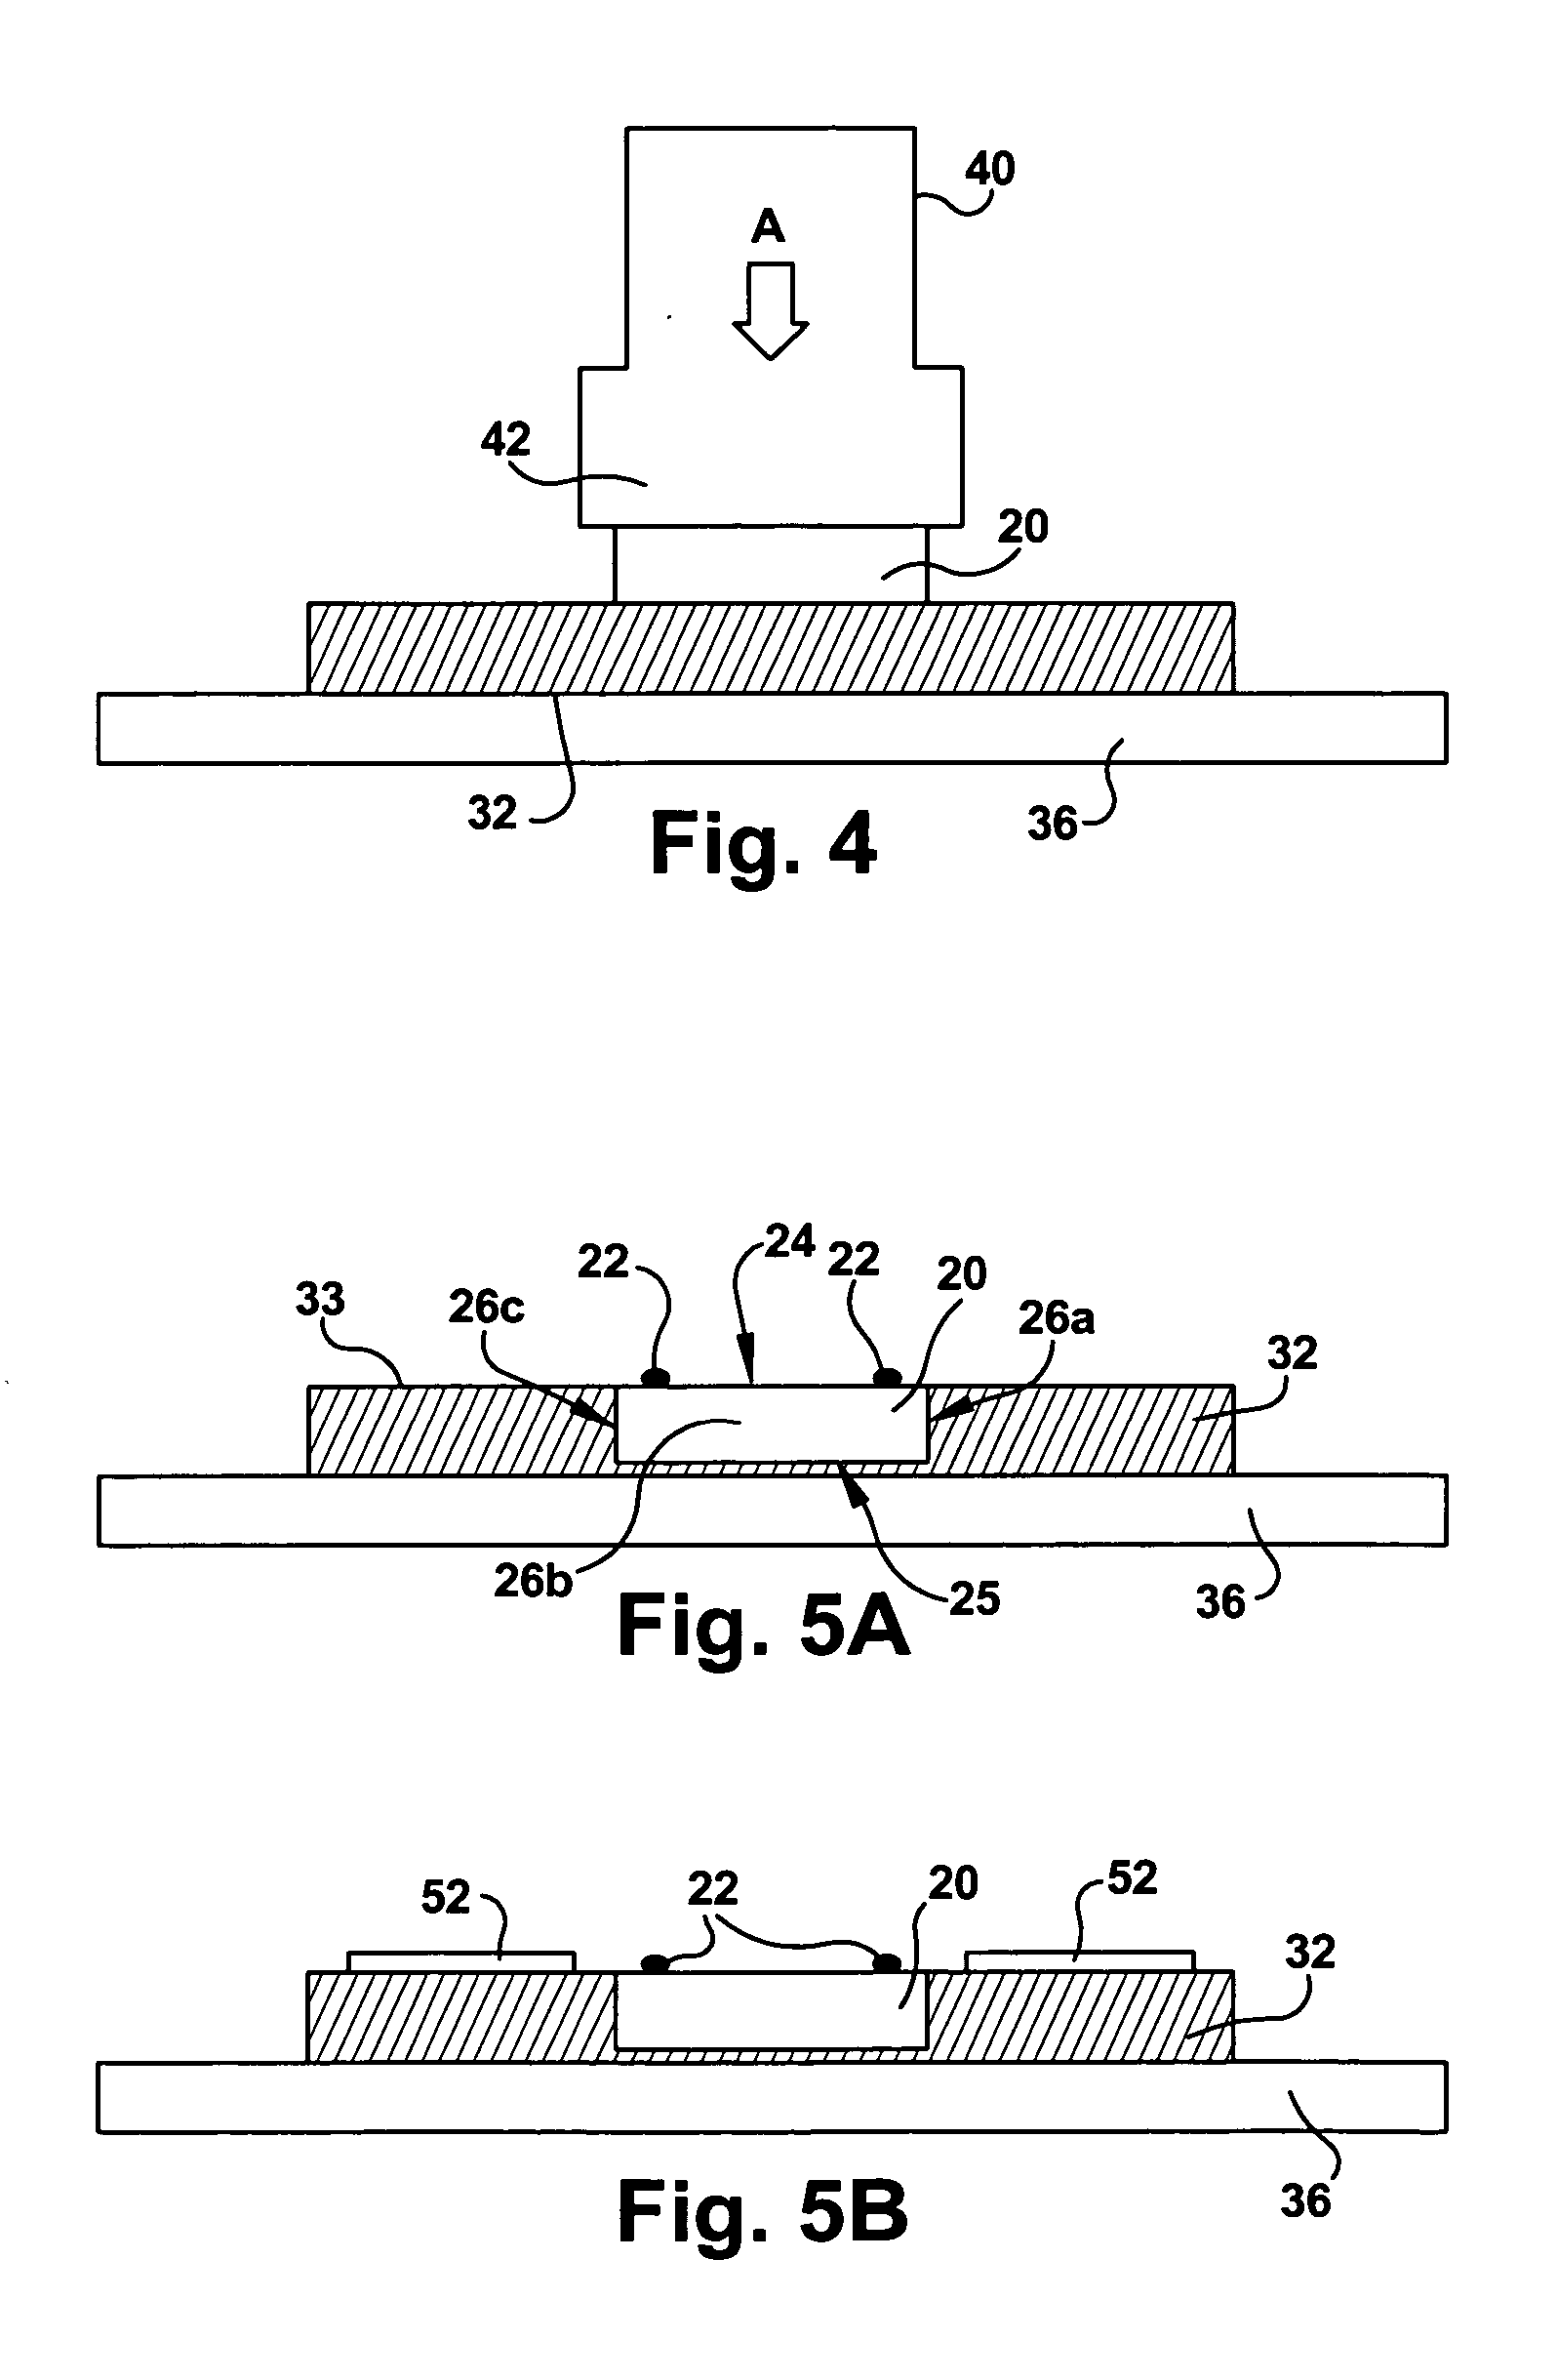 Electrical device and method of manufacturing electrical devices using film embossing techniques to embed integrated circuits into film